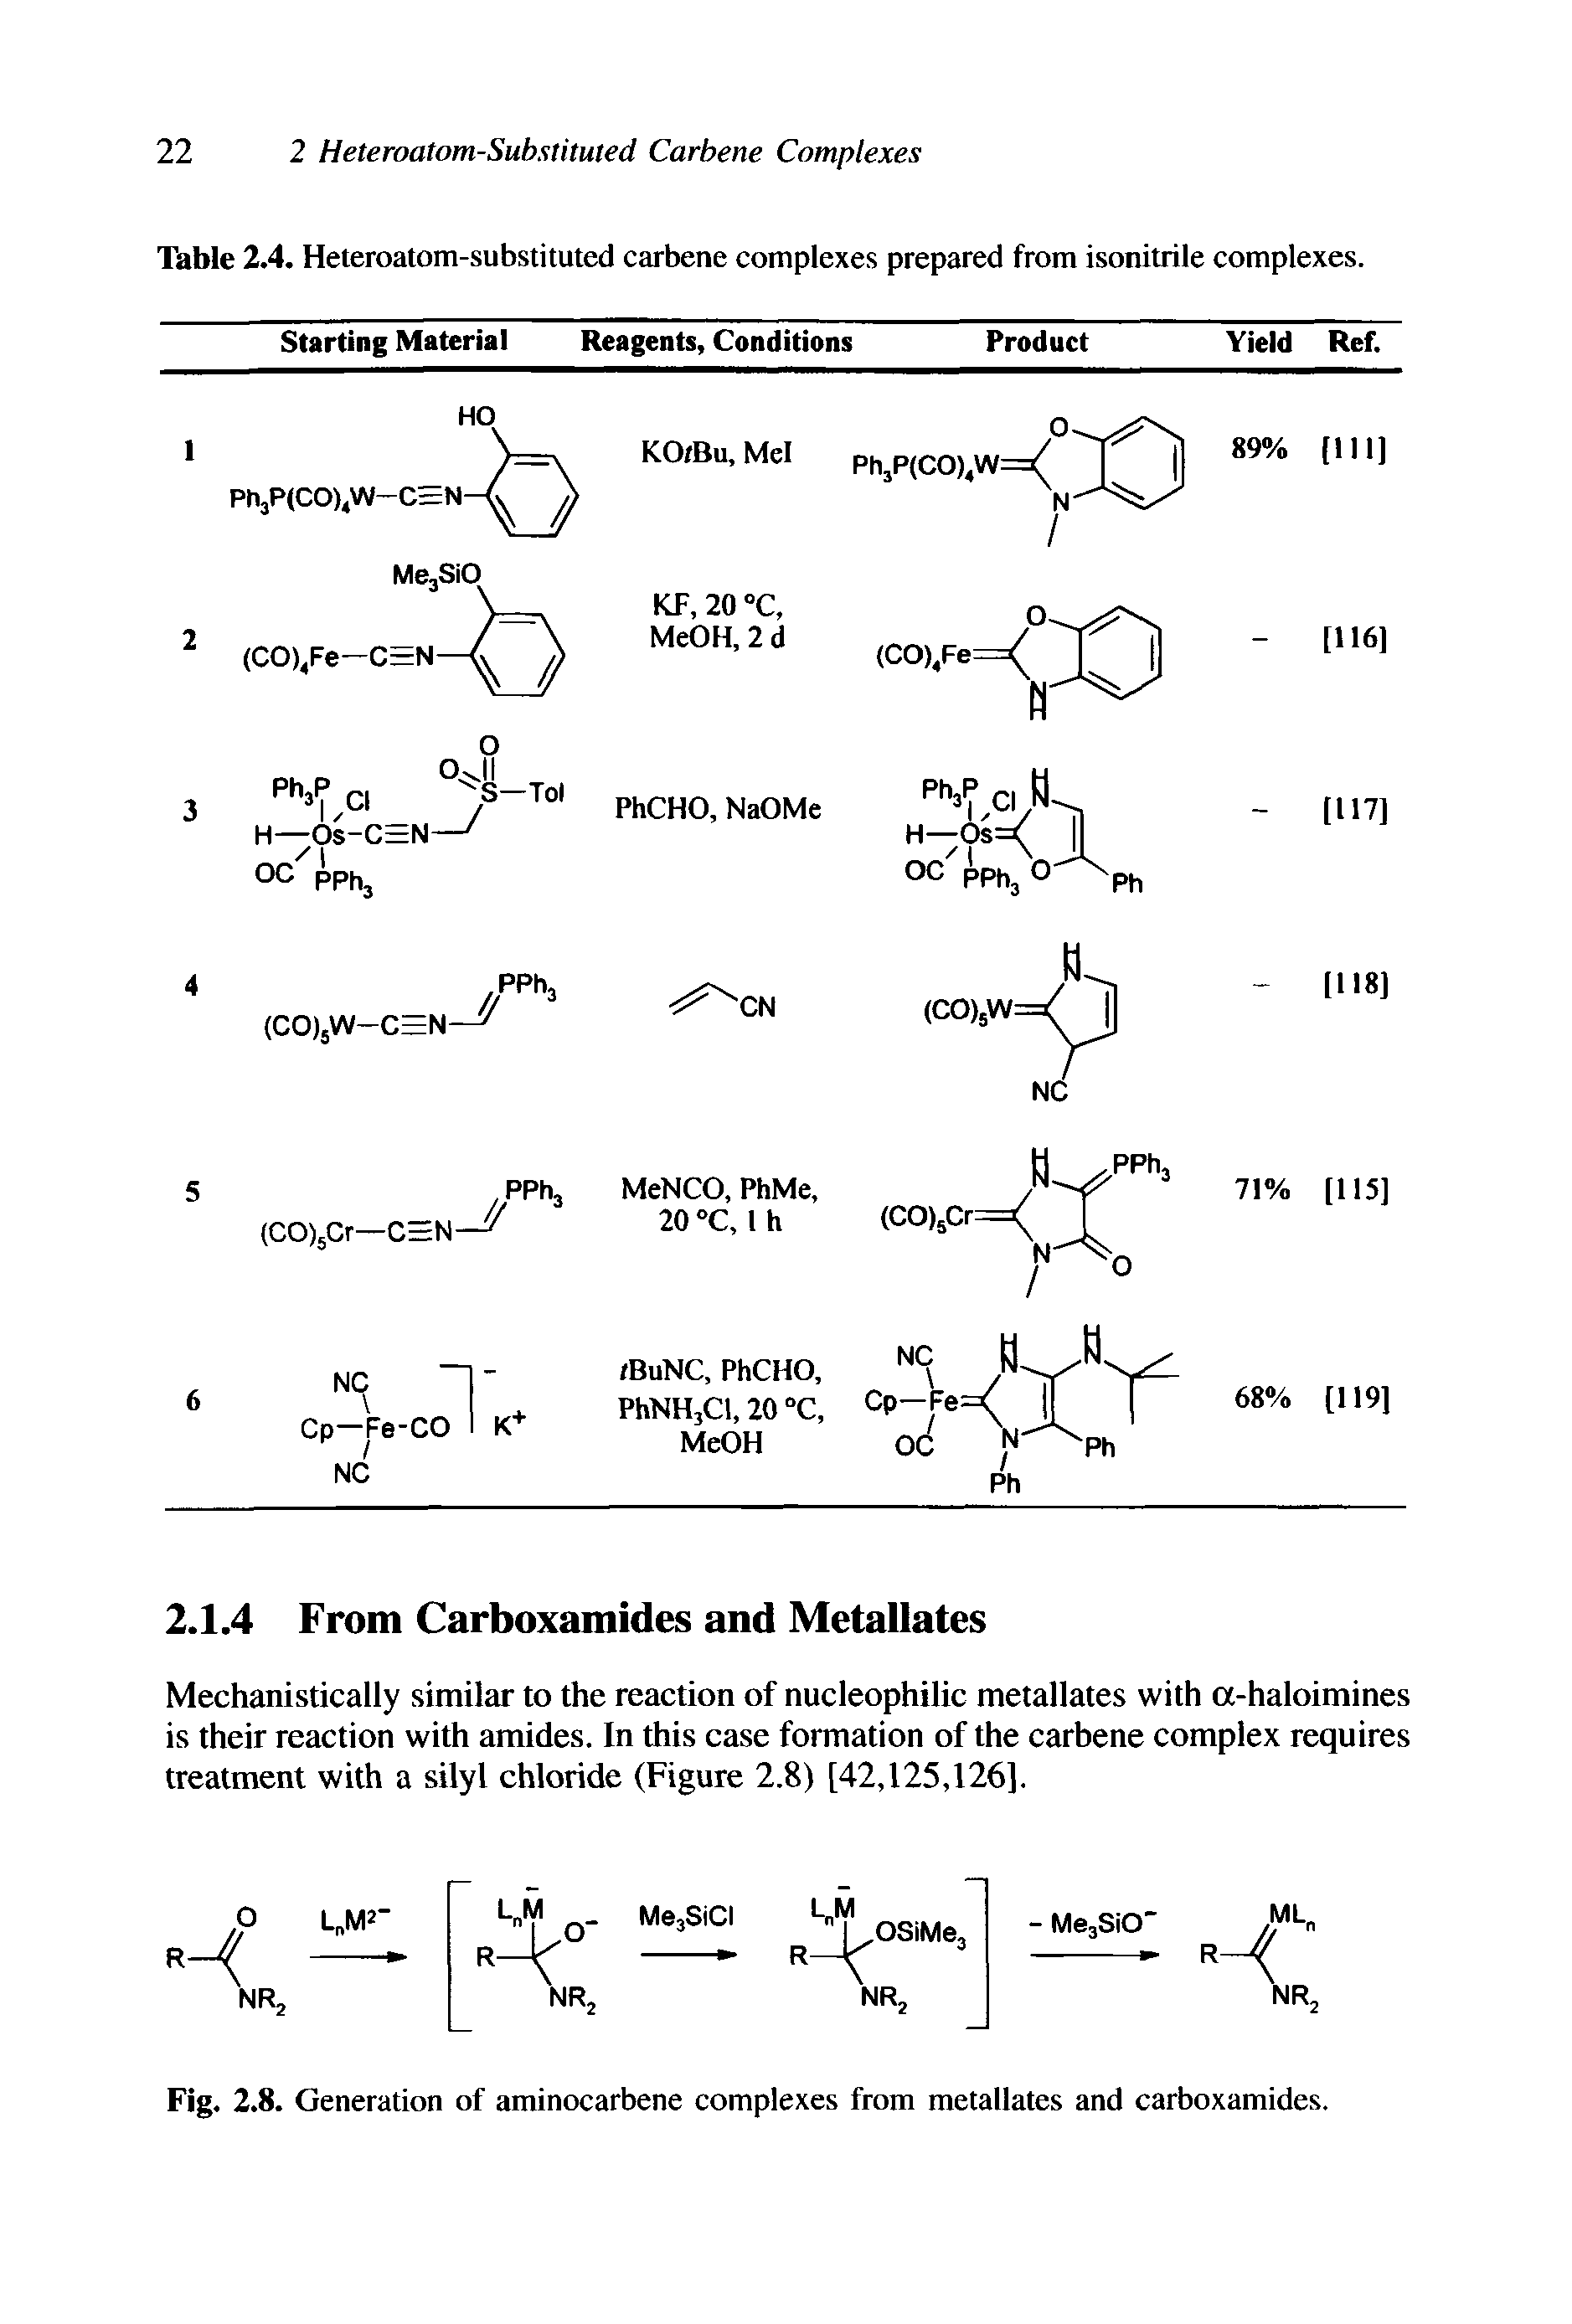 Table 2.4. Heteroatom-substituted carbene complexes prepared from isonitrile complexes.